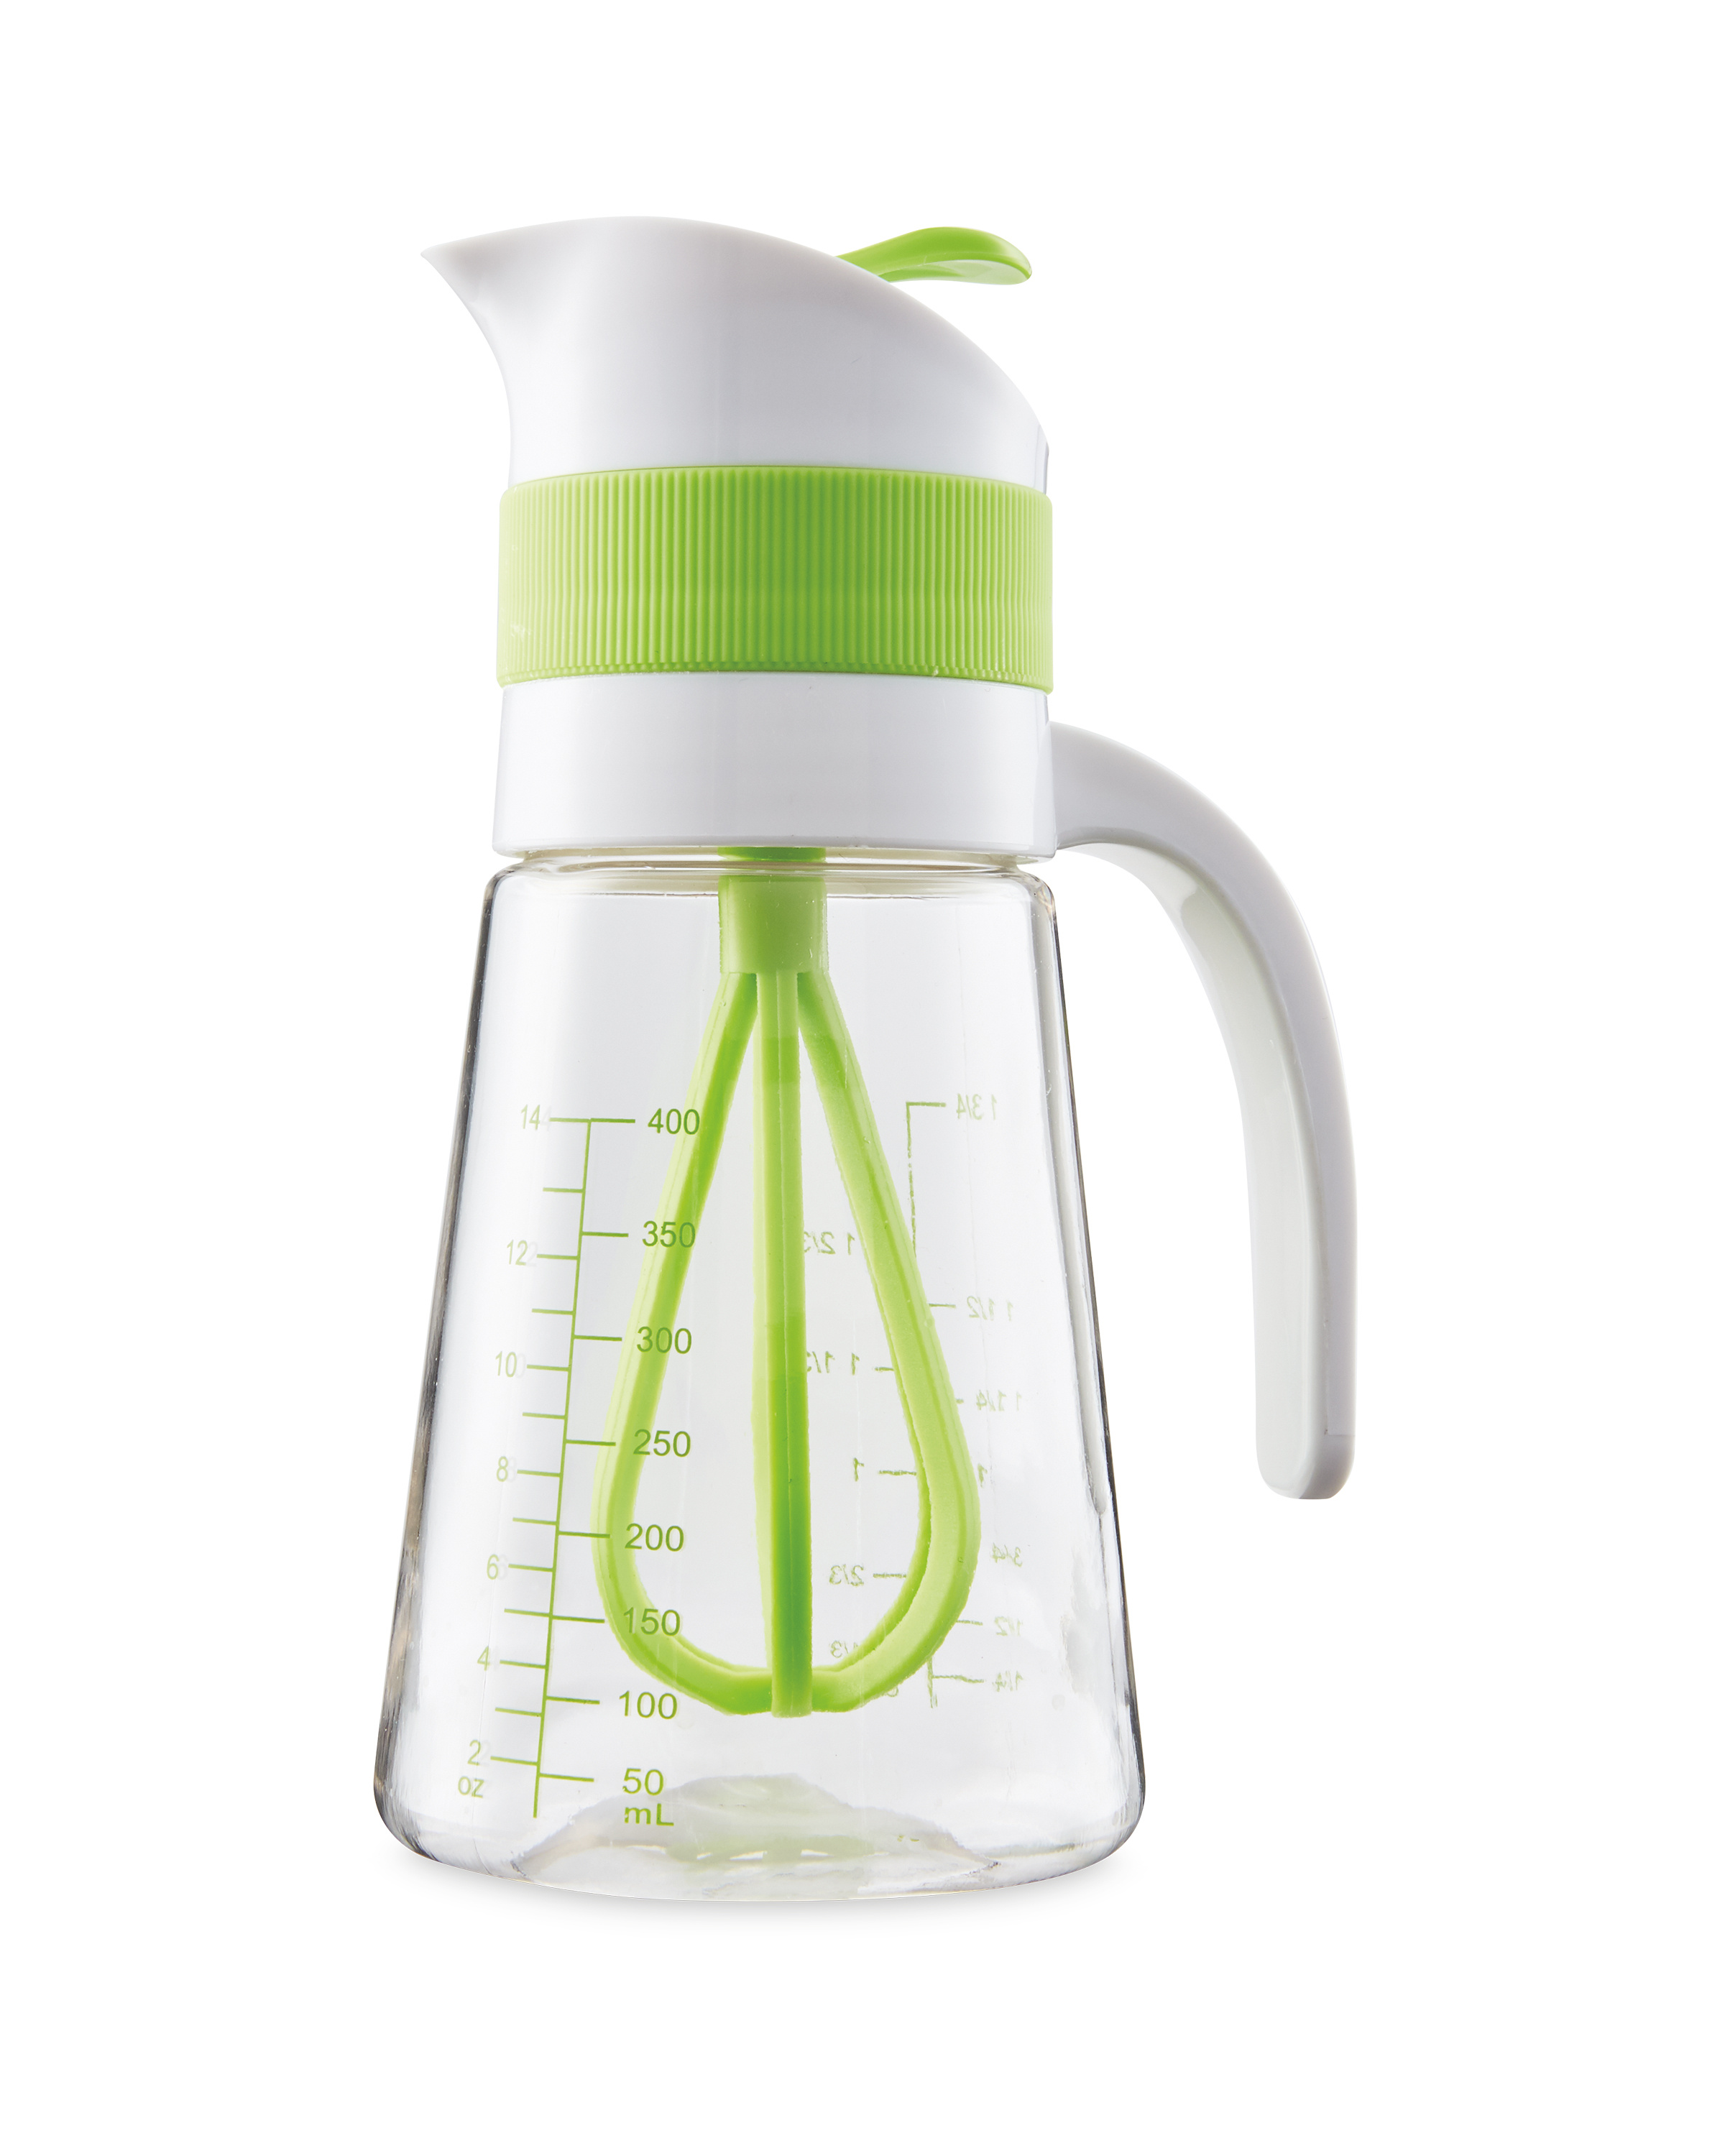 OXO Good Grips Twist and Pour 14 oz. Salad Dressing Mixer in Green